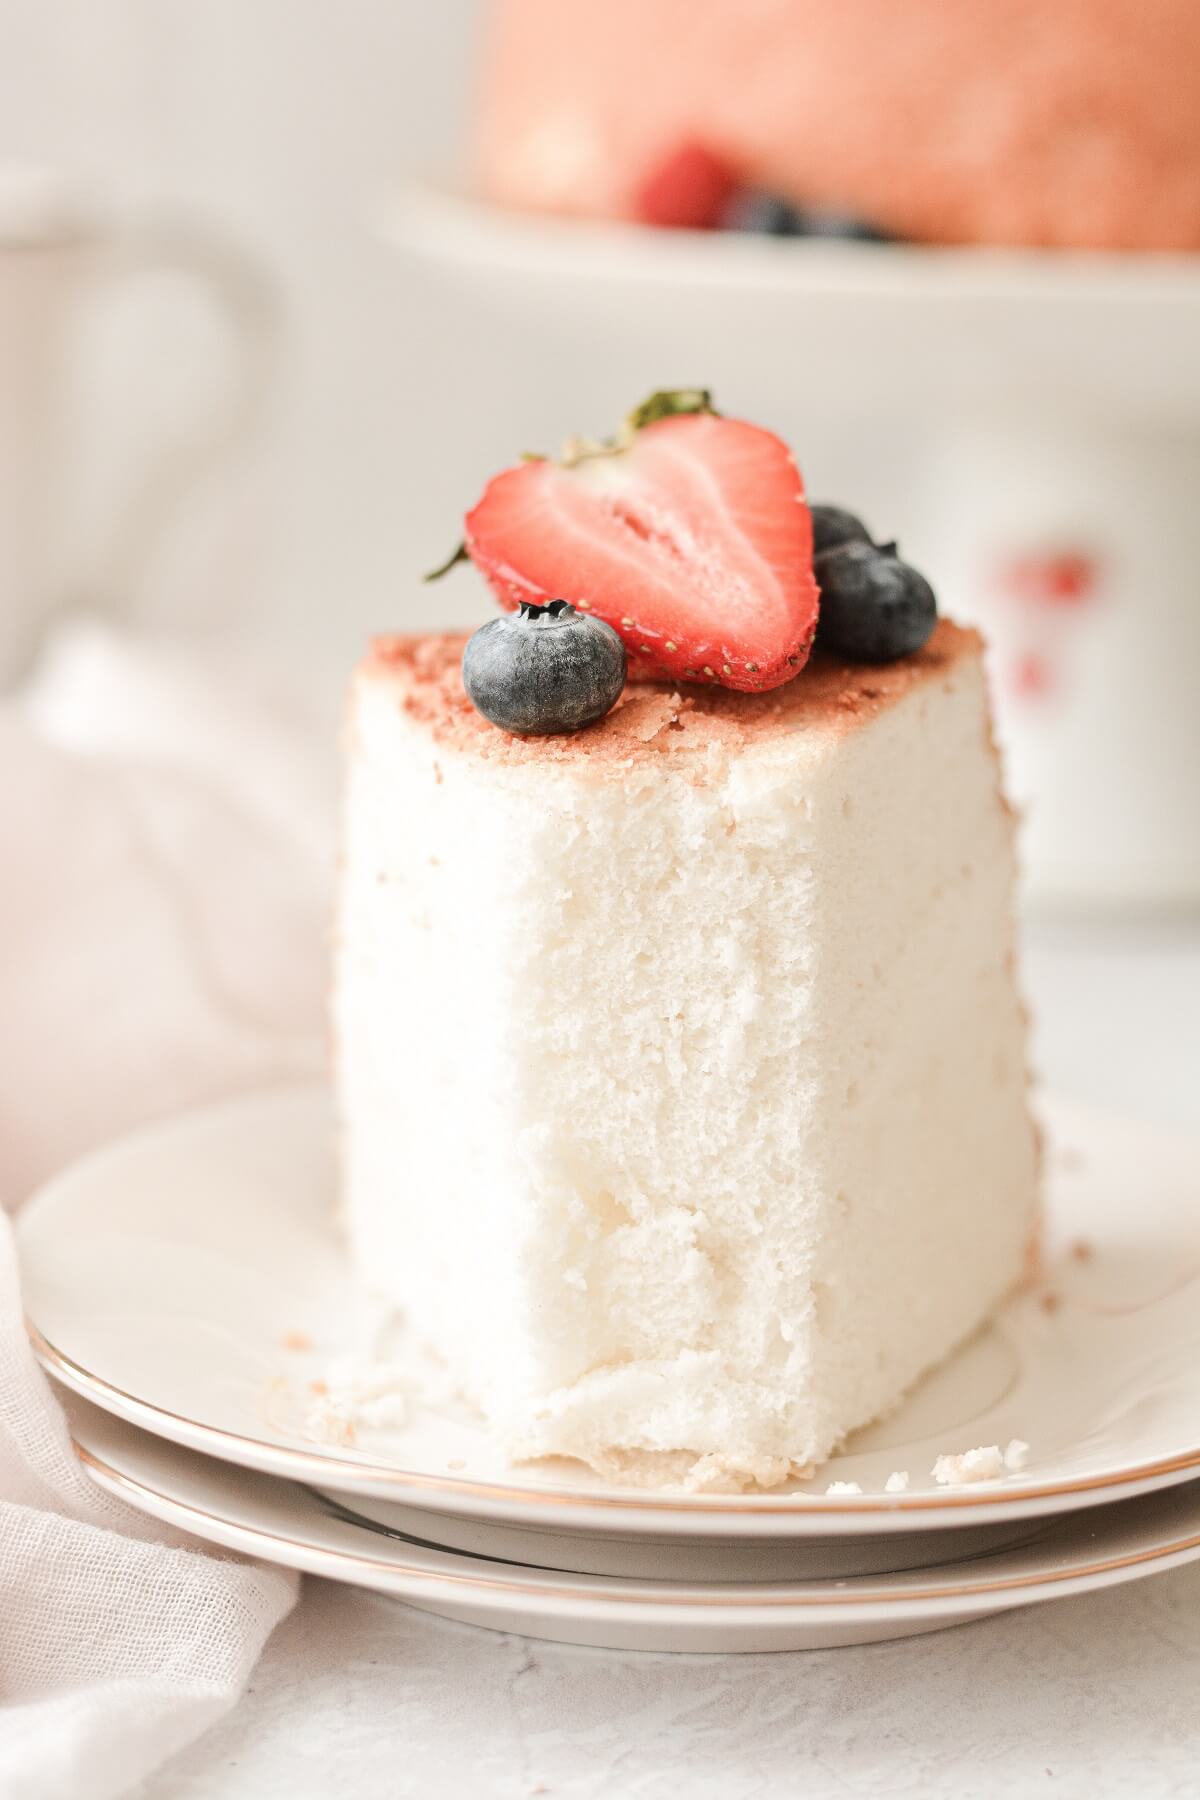 A slice of angel food cake topped with berries.